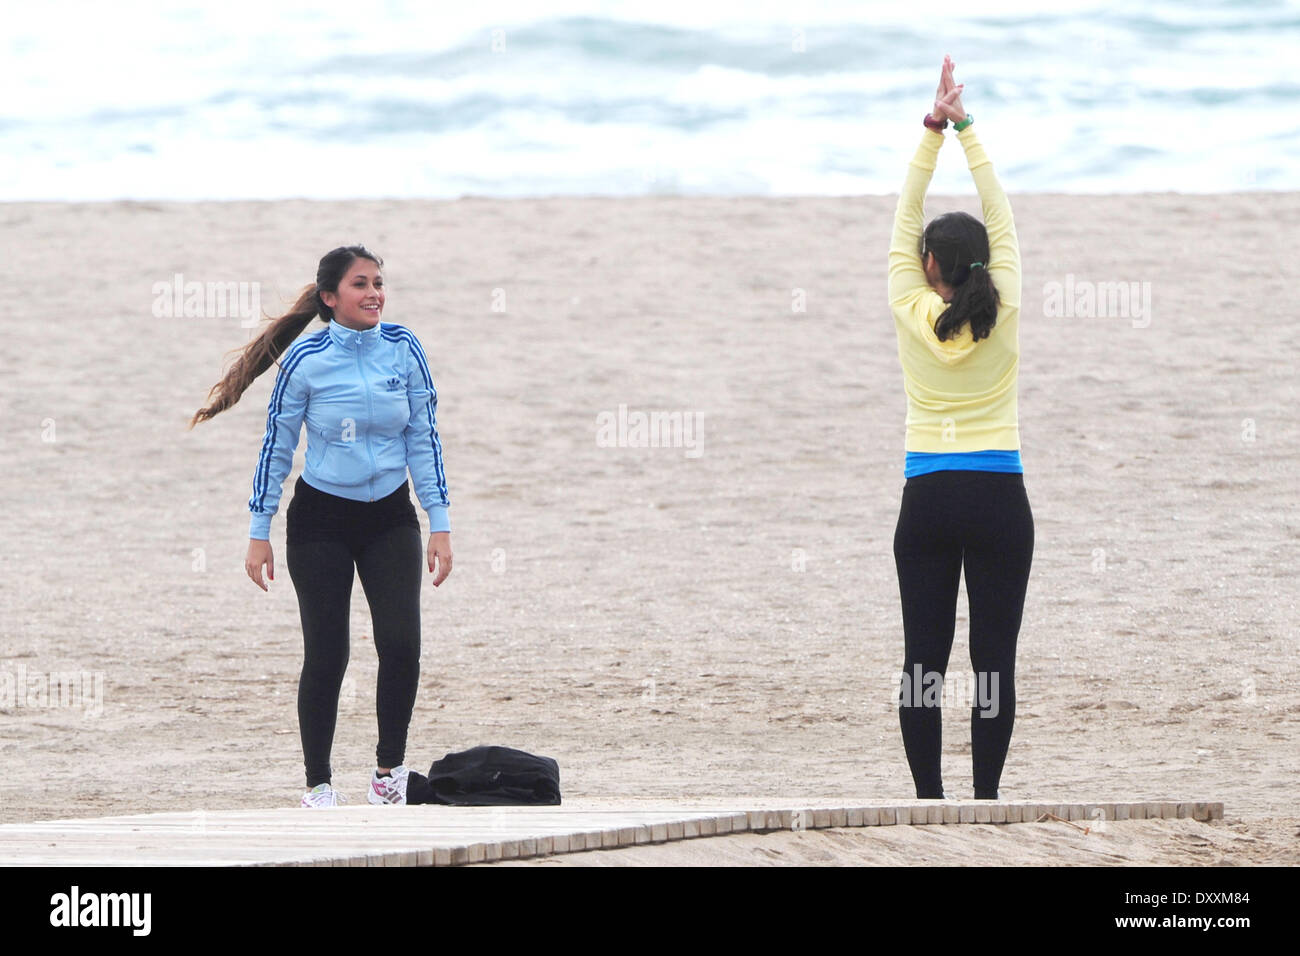 Antonella Roccuzzo works out on the beach with her personal trainer ...